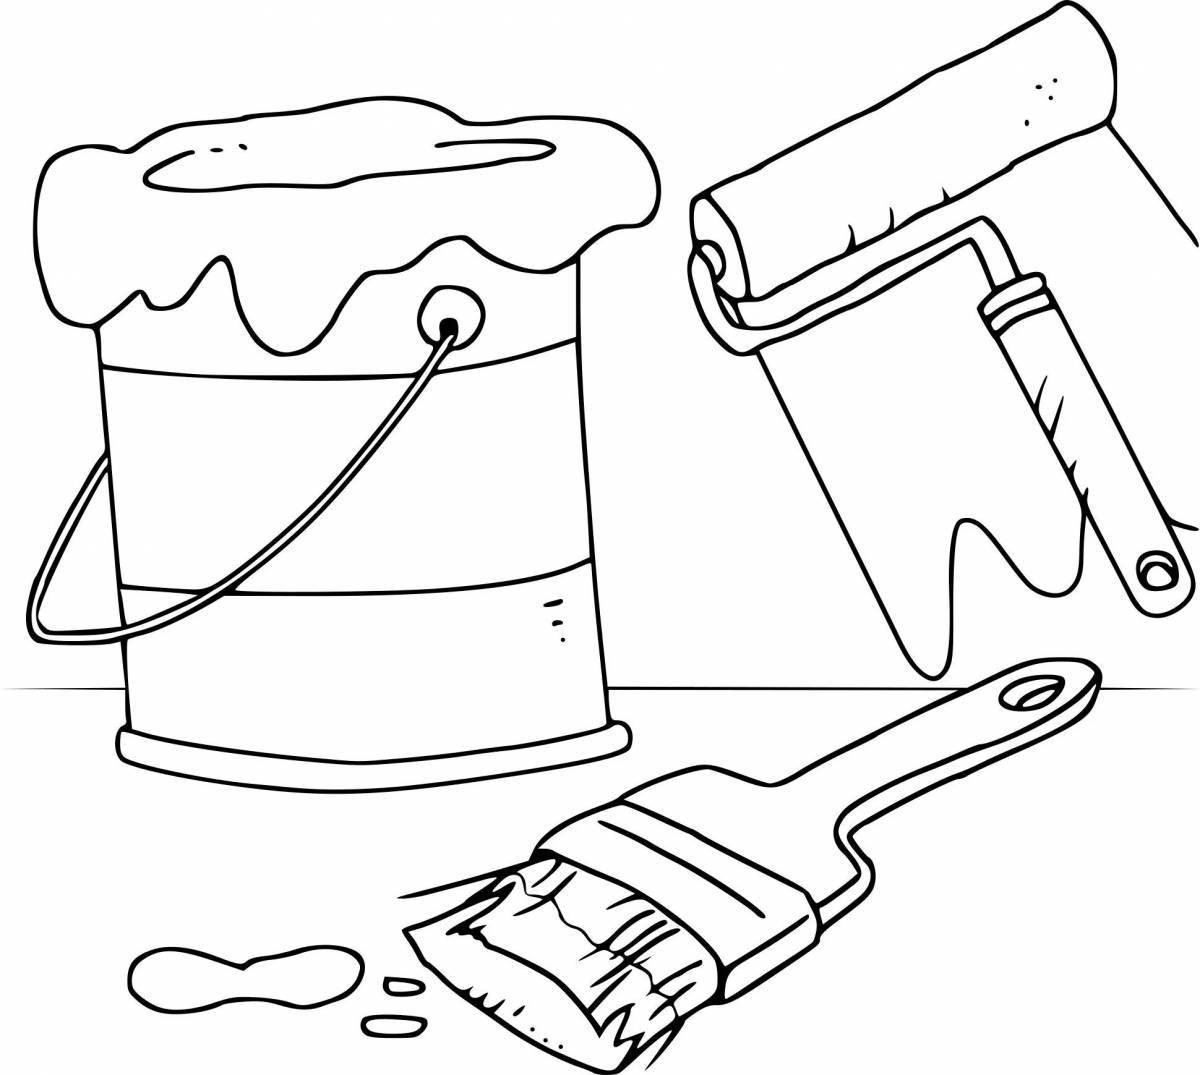 Professionals and tools coloring page